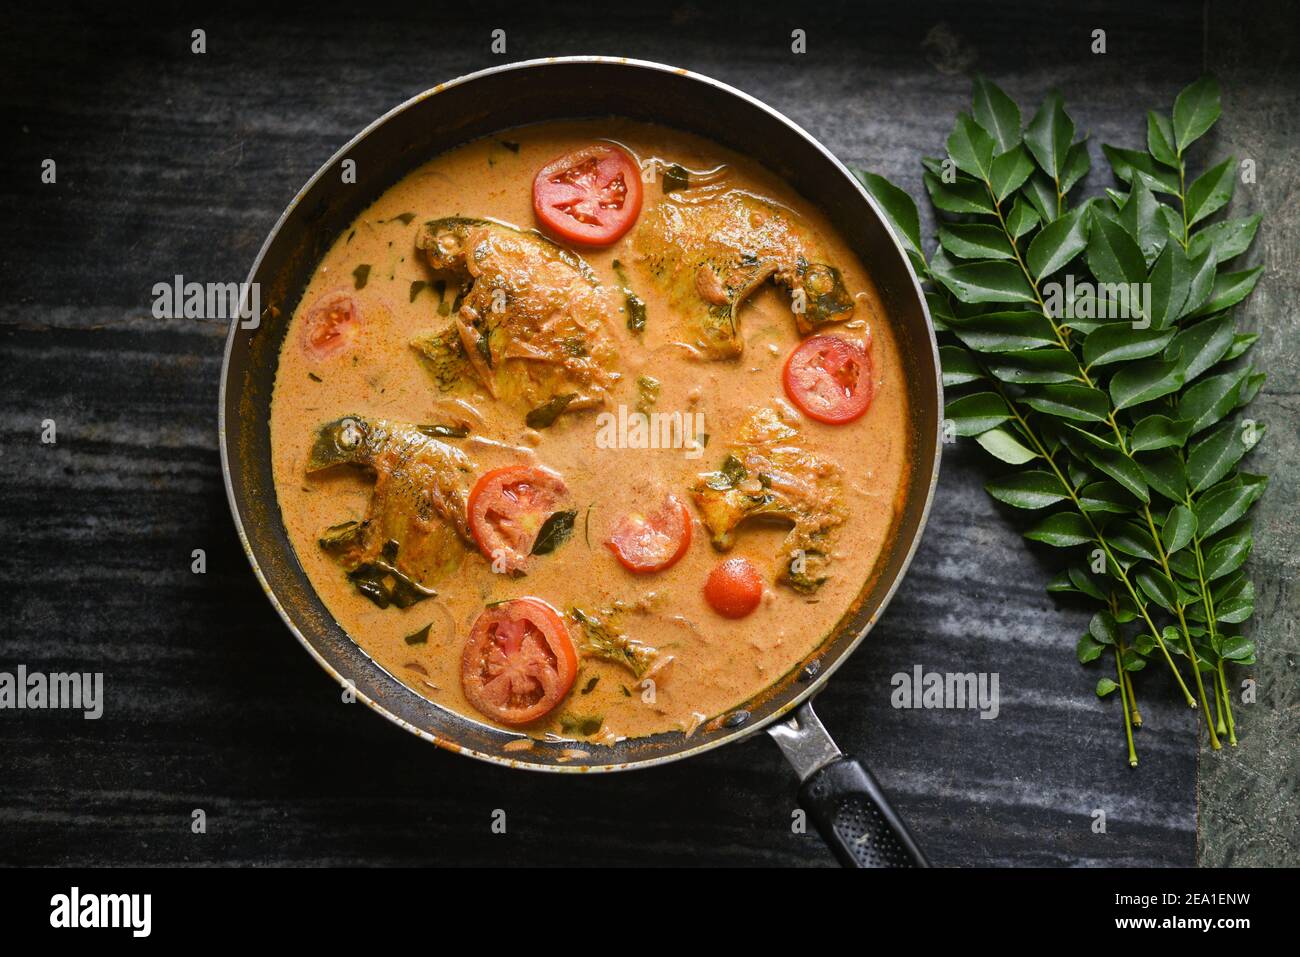 Top view spicy Kerala Style Fish curry stew and Appam Fish Molee Meen Moilee Indian food. Fish curry with coconut milk red chili, curry leaf, tomato. Stock Photo